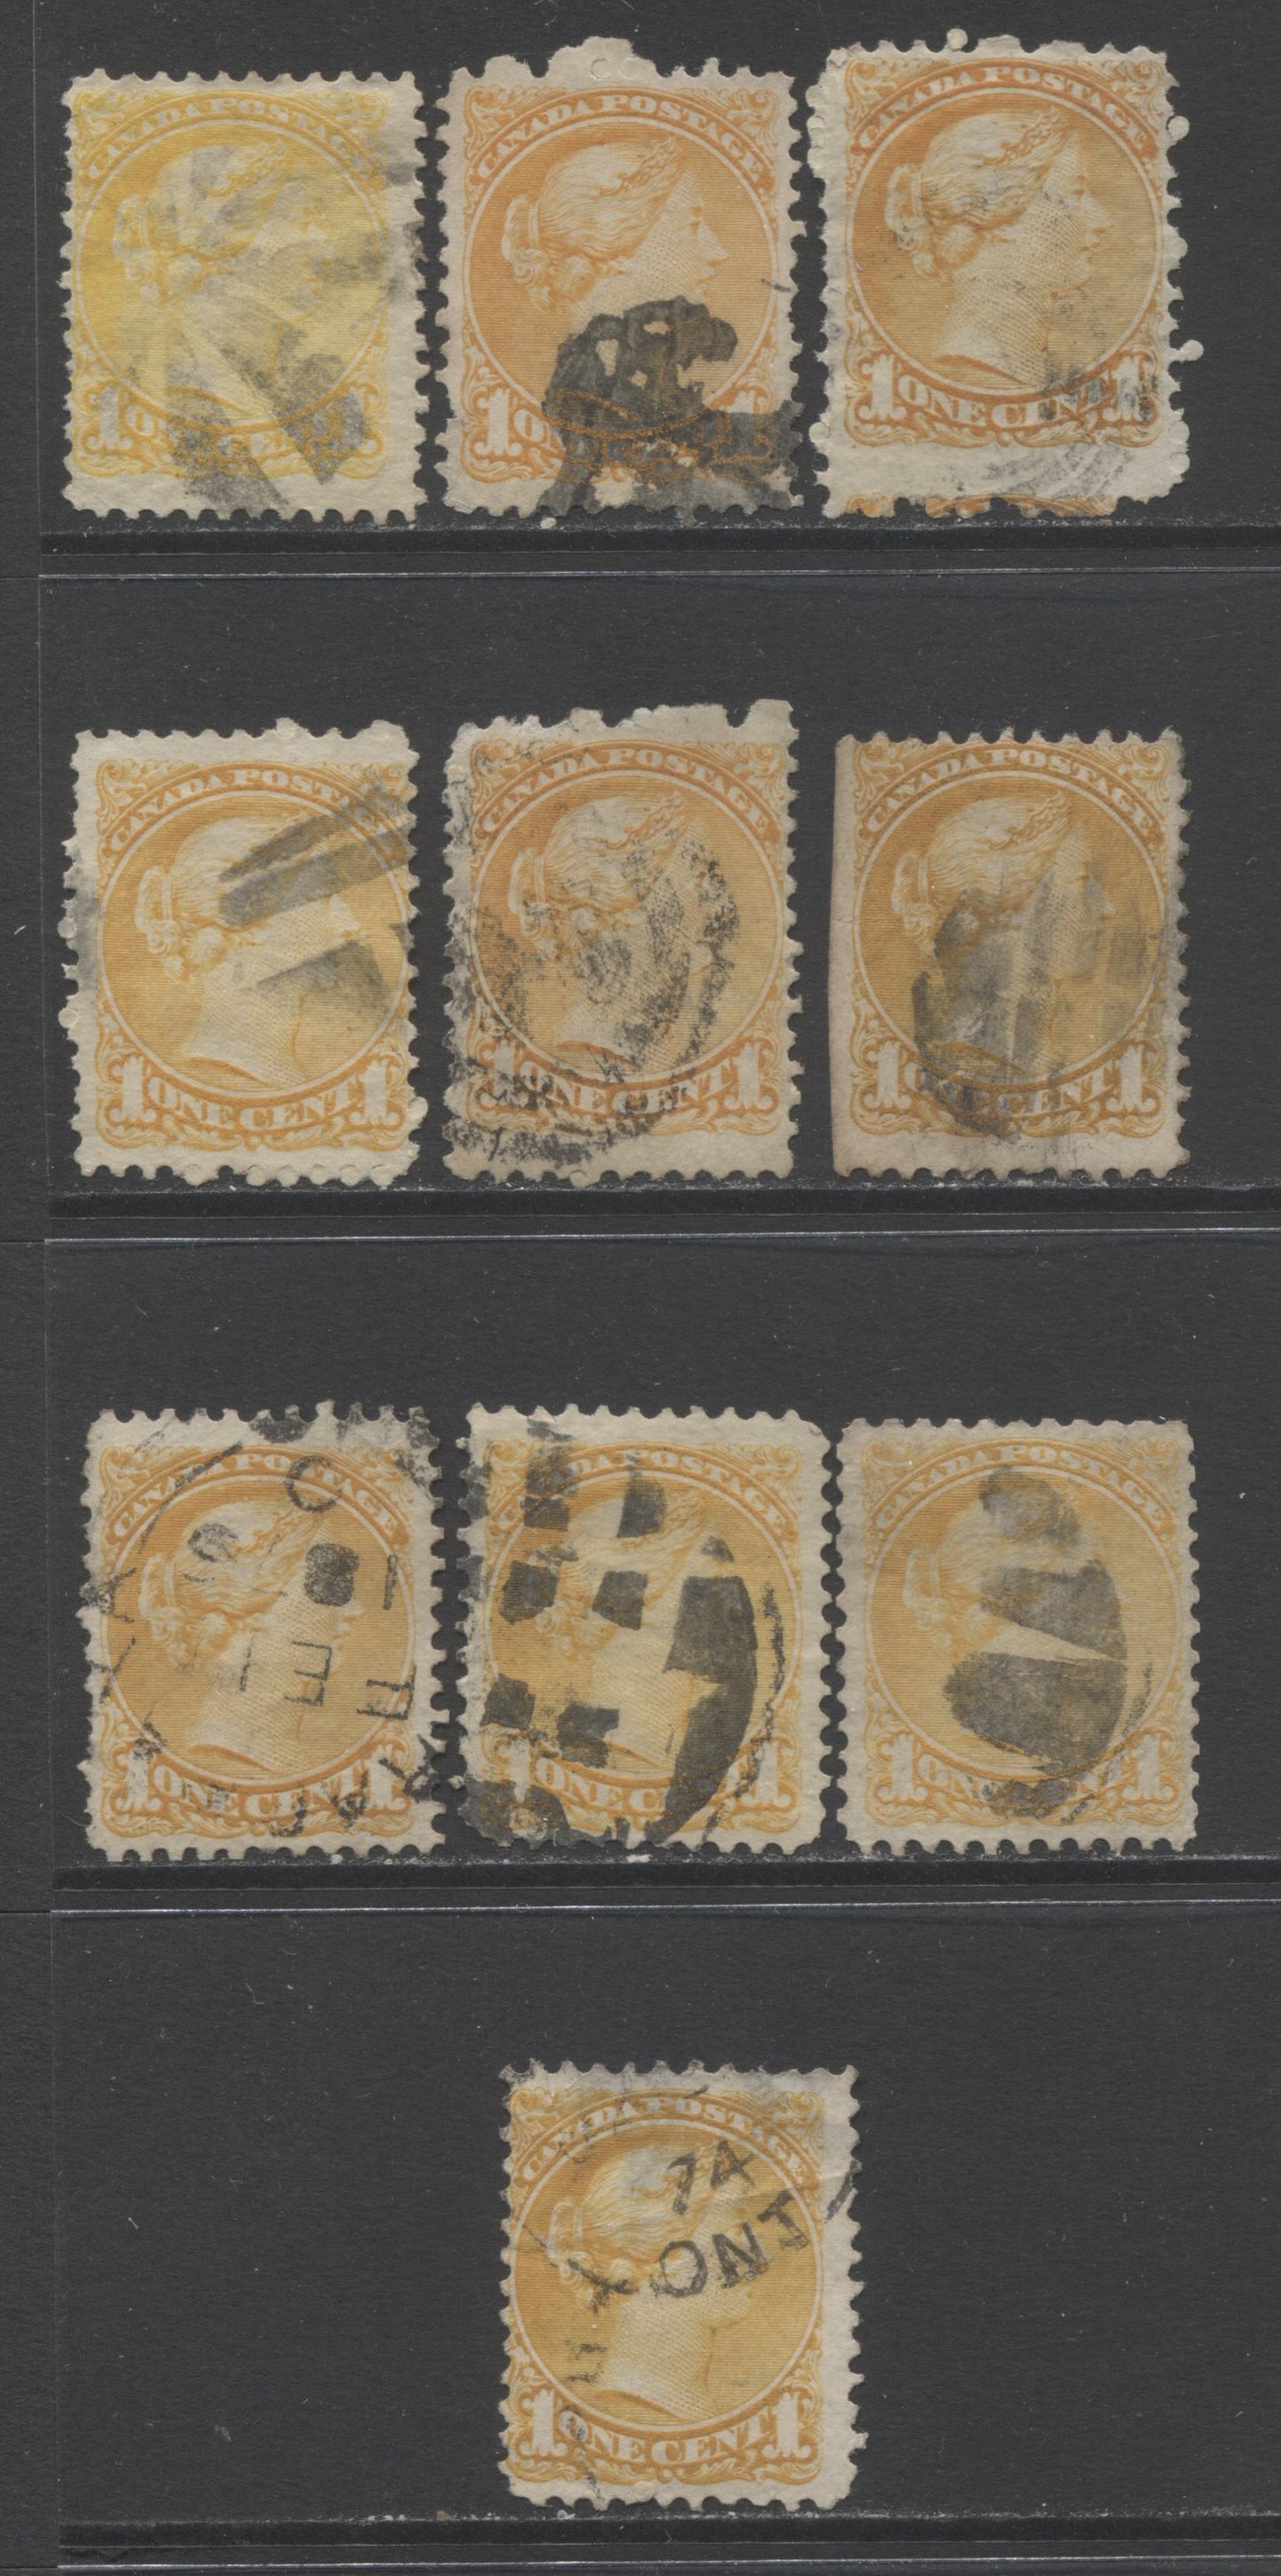 Lot 200 Canada #35d,iii,vii 1c Yellow, Lemon Yellow & Orange Queen Victoria, 1870-1893 Small Queen Issue, An Ungraded Study Lot Of 10 Used Singles Perfs 11.5 x 12 & 11.75 x 12